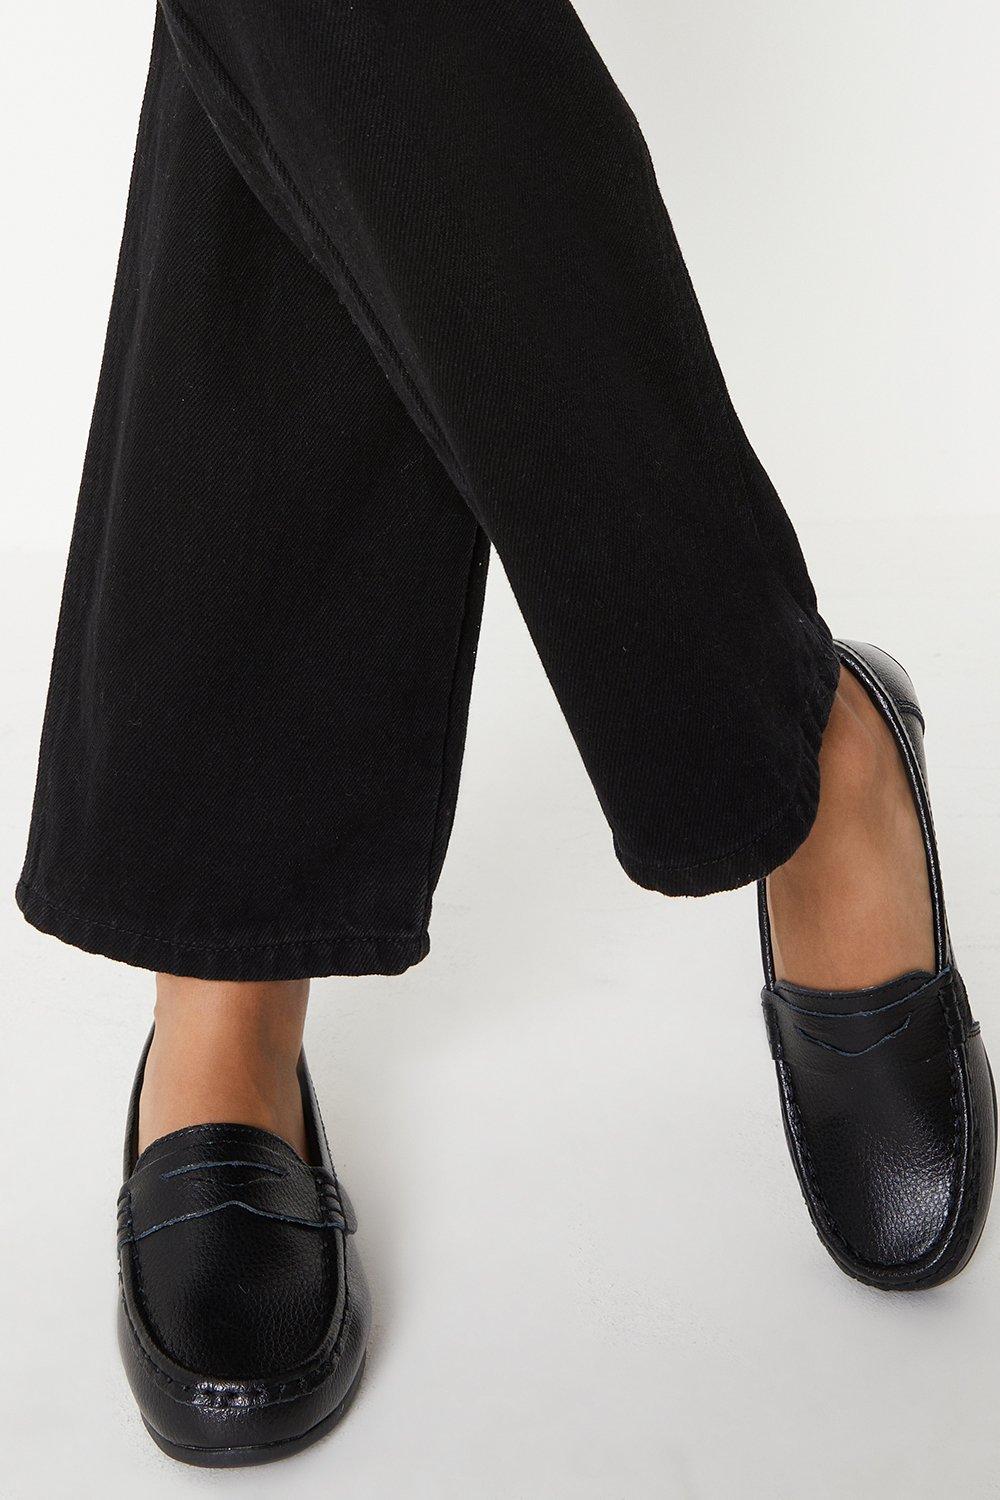 Women’s Good For The Sole: Wide Fit Niamh Leather Comfort Loafers - black - 7